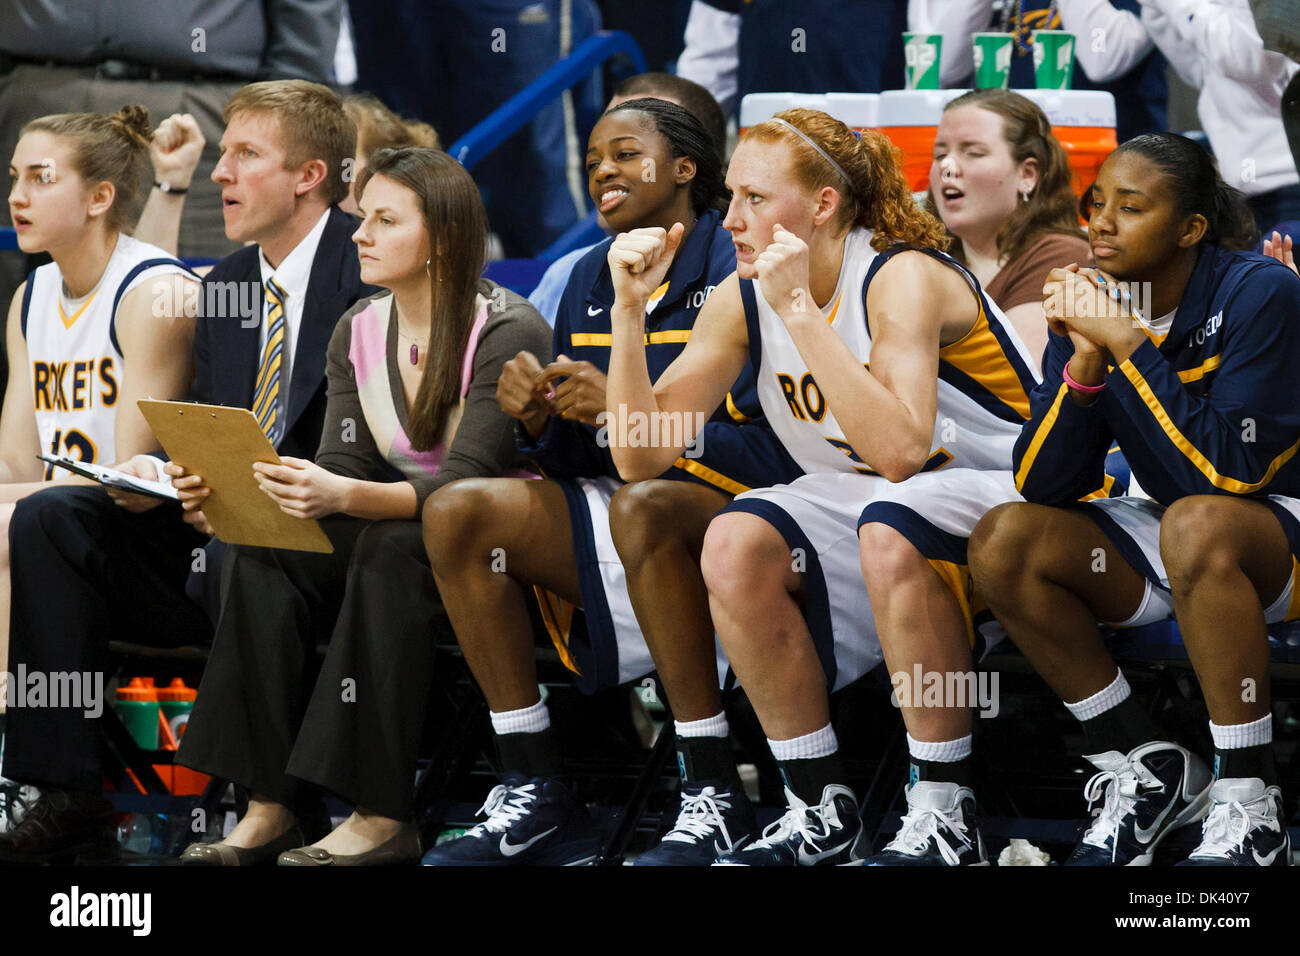 Mar. 16, 2011 - Toledo, Ohio, U.S - Toledo forward Melissa Goodall (#32) and her teammates watch the action on the court during second-half game action.  The Toledo Rockets, of the Mid-American Conference, defeated the Delaware Blue Hens, of the Colonial Athletic Association, 58-55 in the first round game of the 2011 Women's National Invitational Tournament being played at Savage A Stock Photo